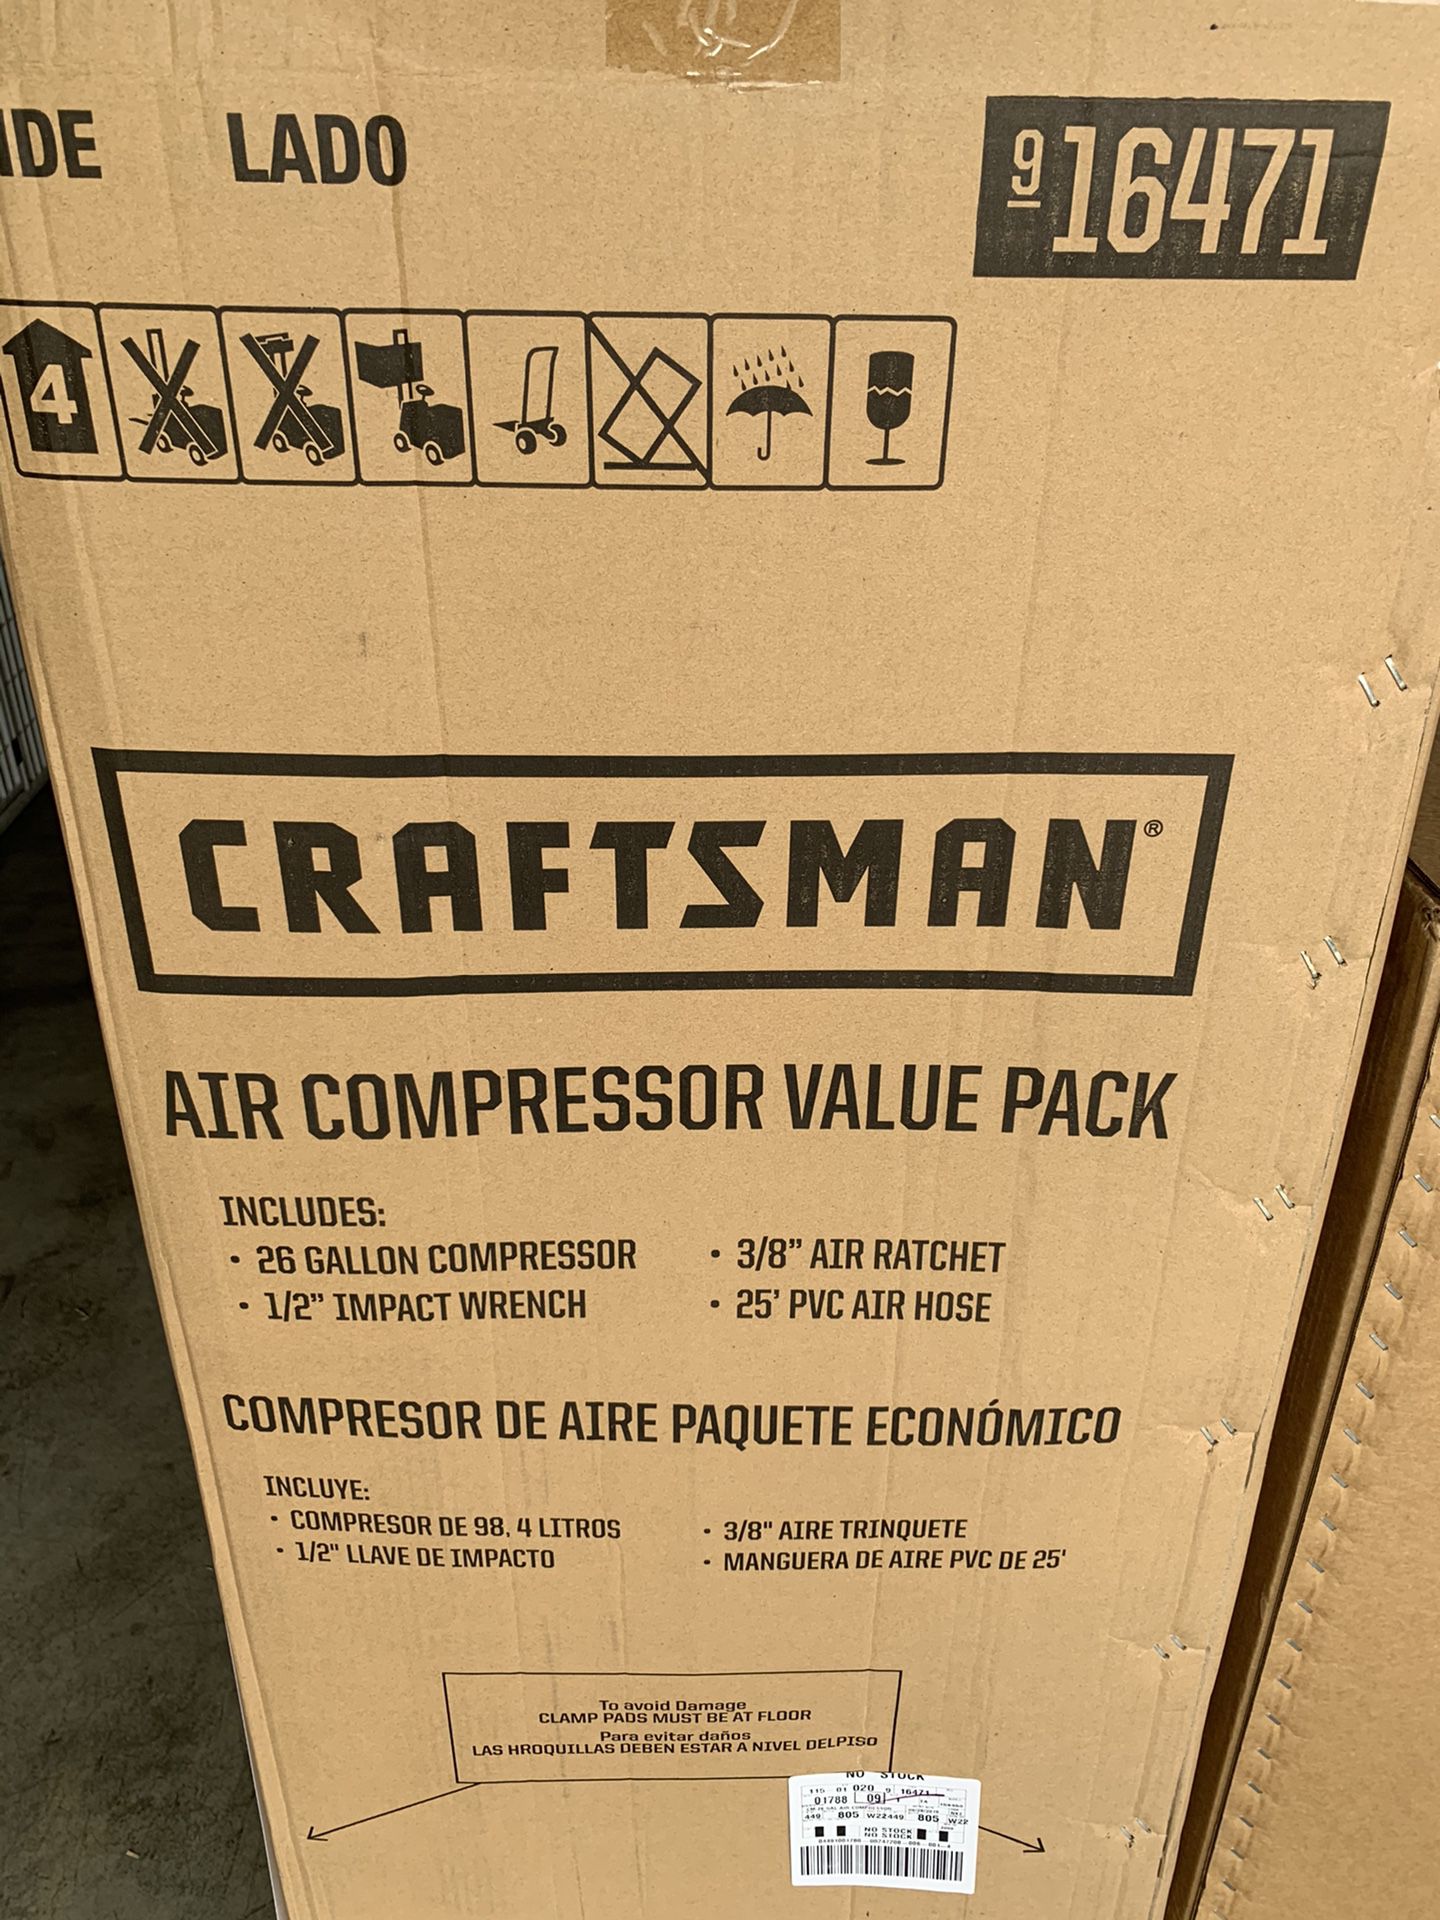 Craftsman air compressor with impact gun and ratchet